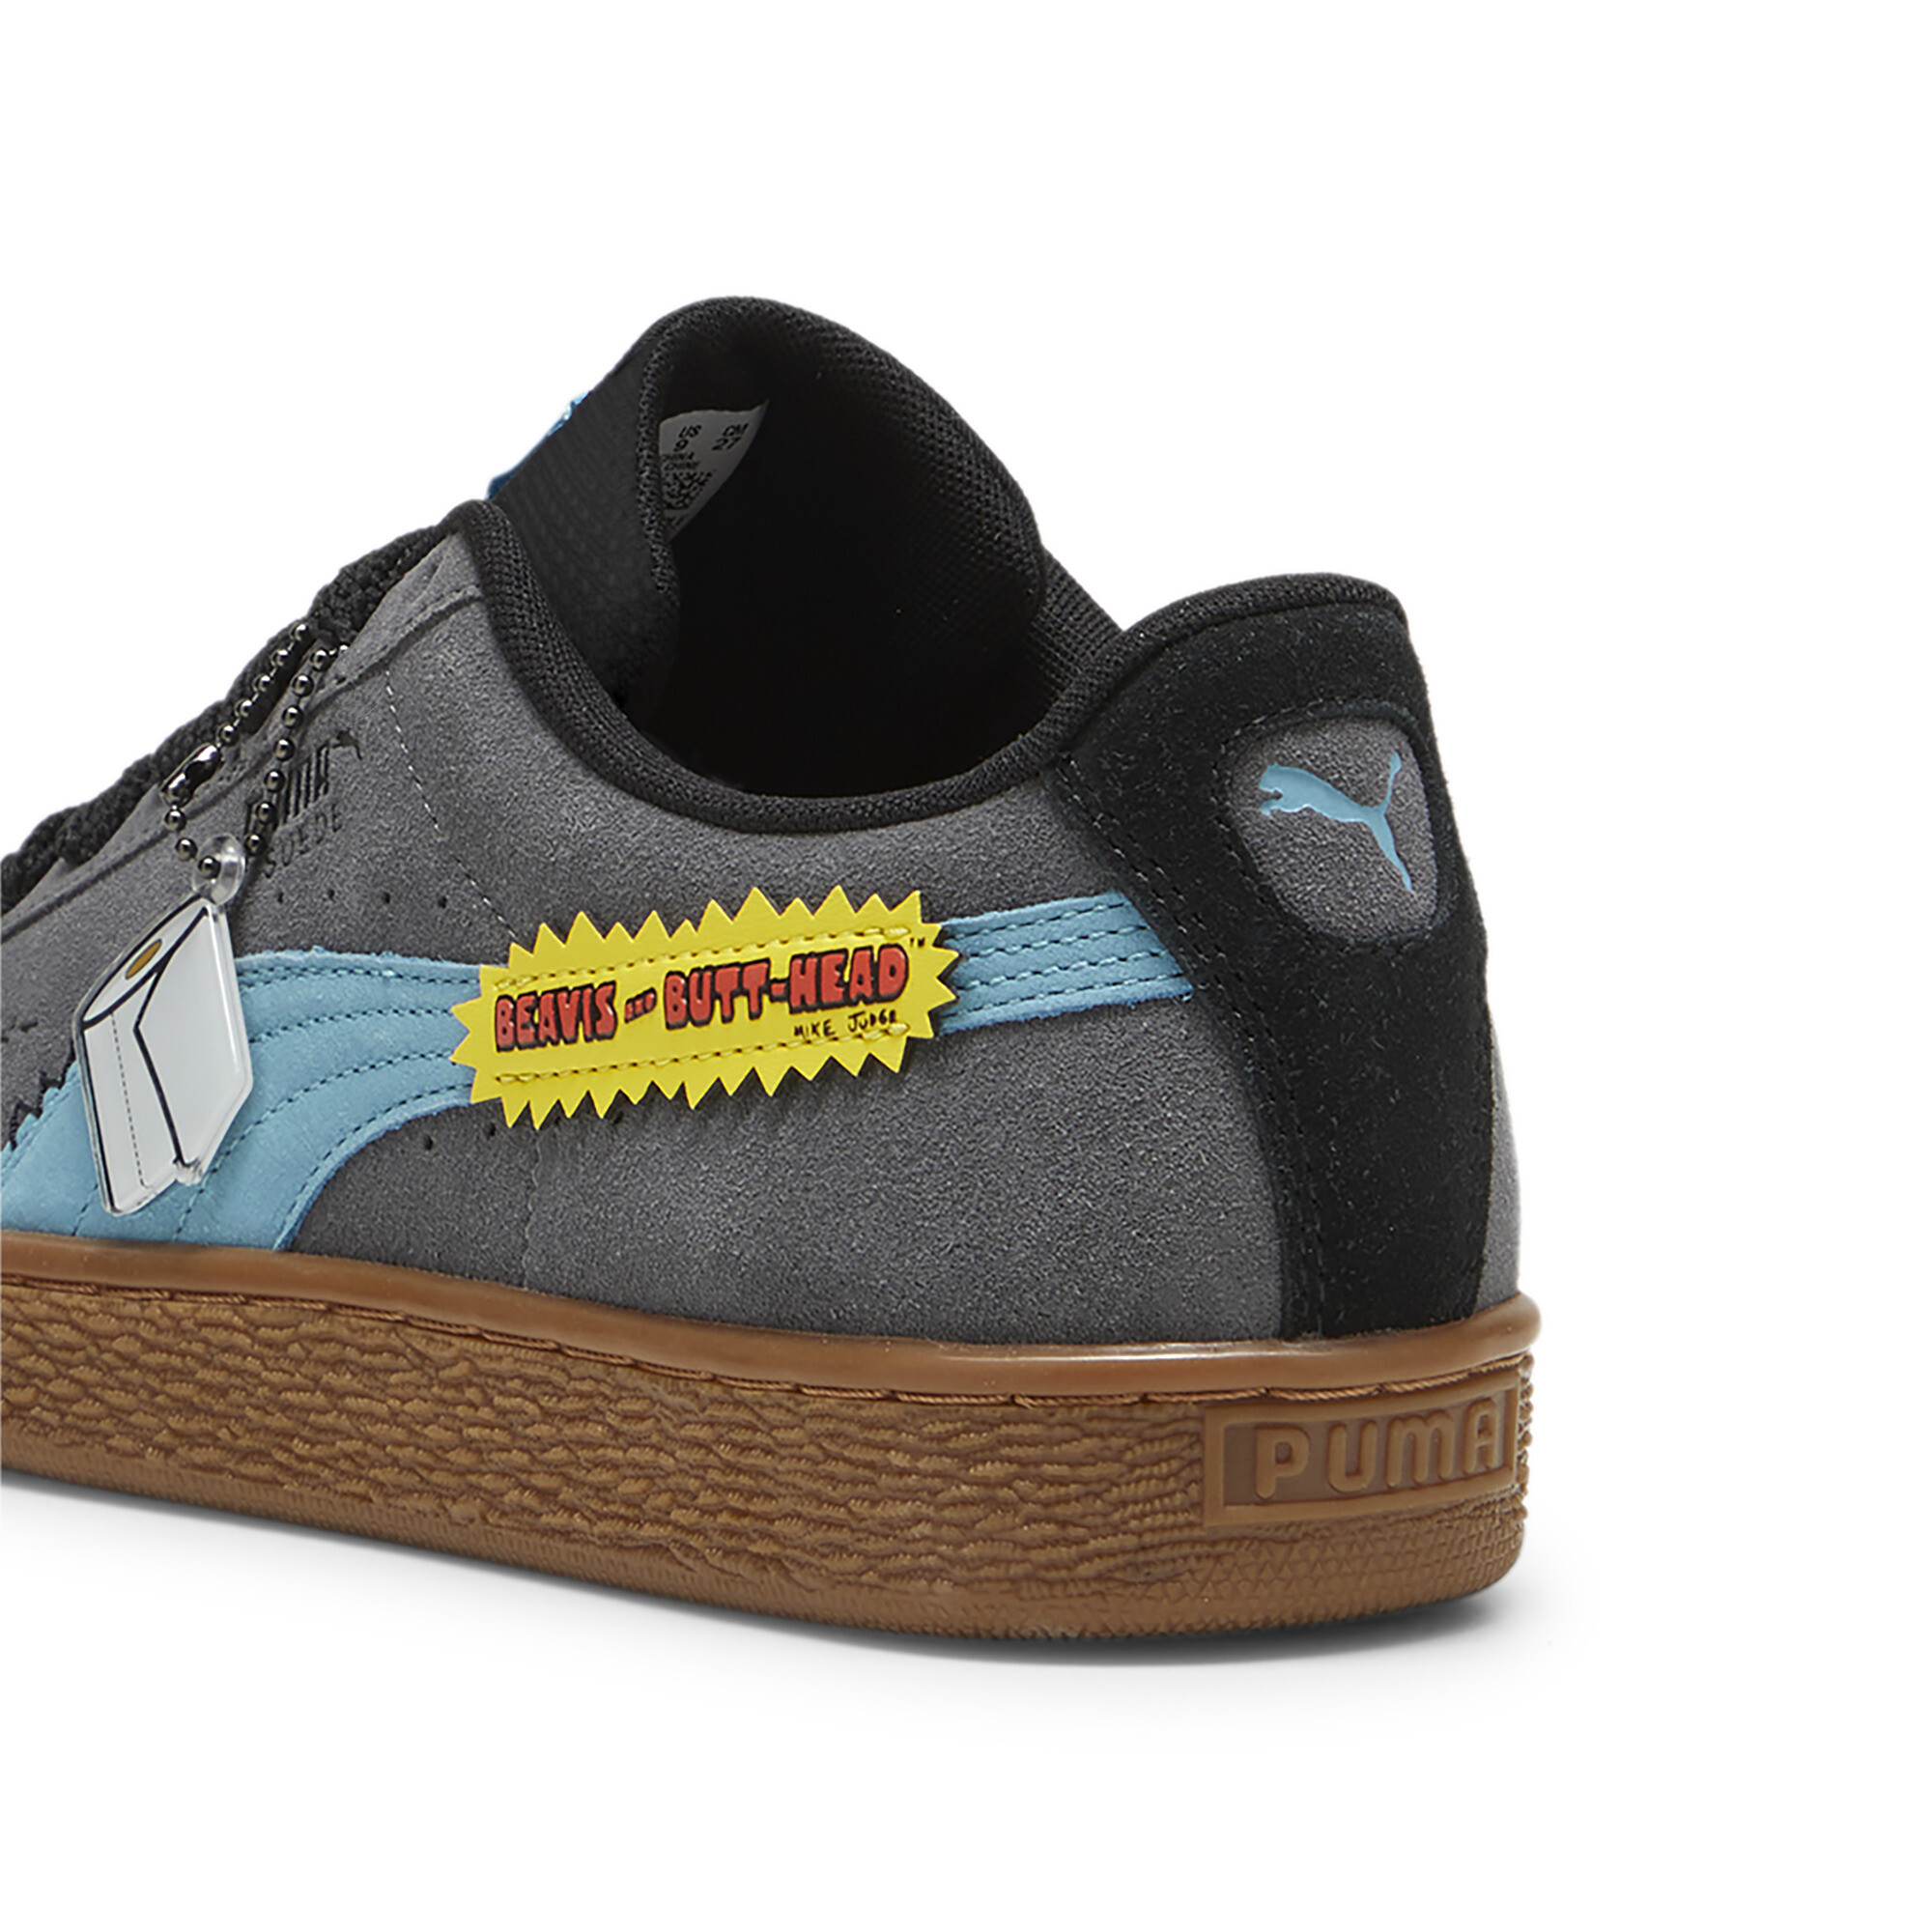 Men's Puma X BEAVIS AND BUTTHEAD Suede Sneakers, Gray, Size 42, Shoes